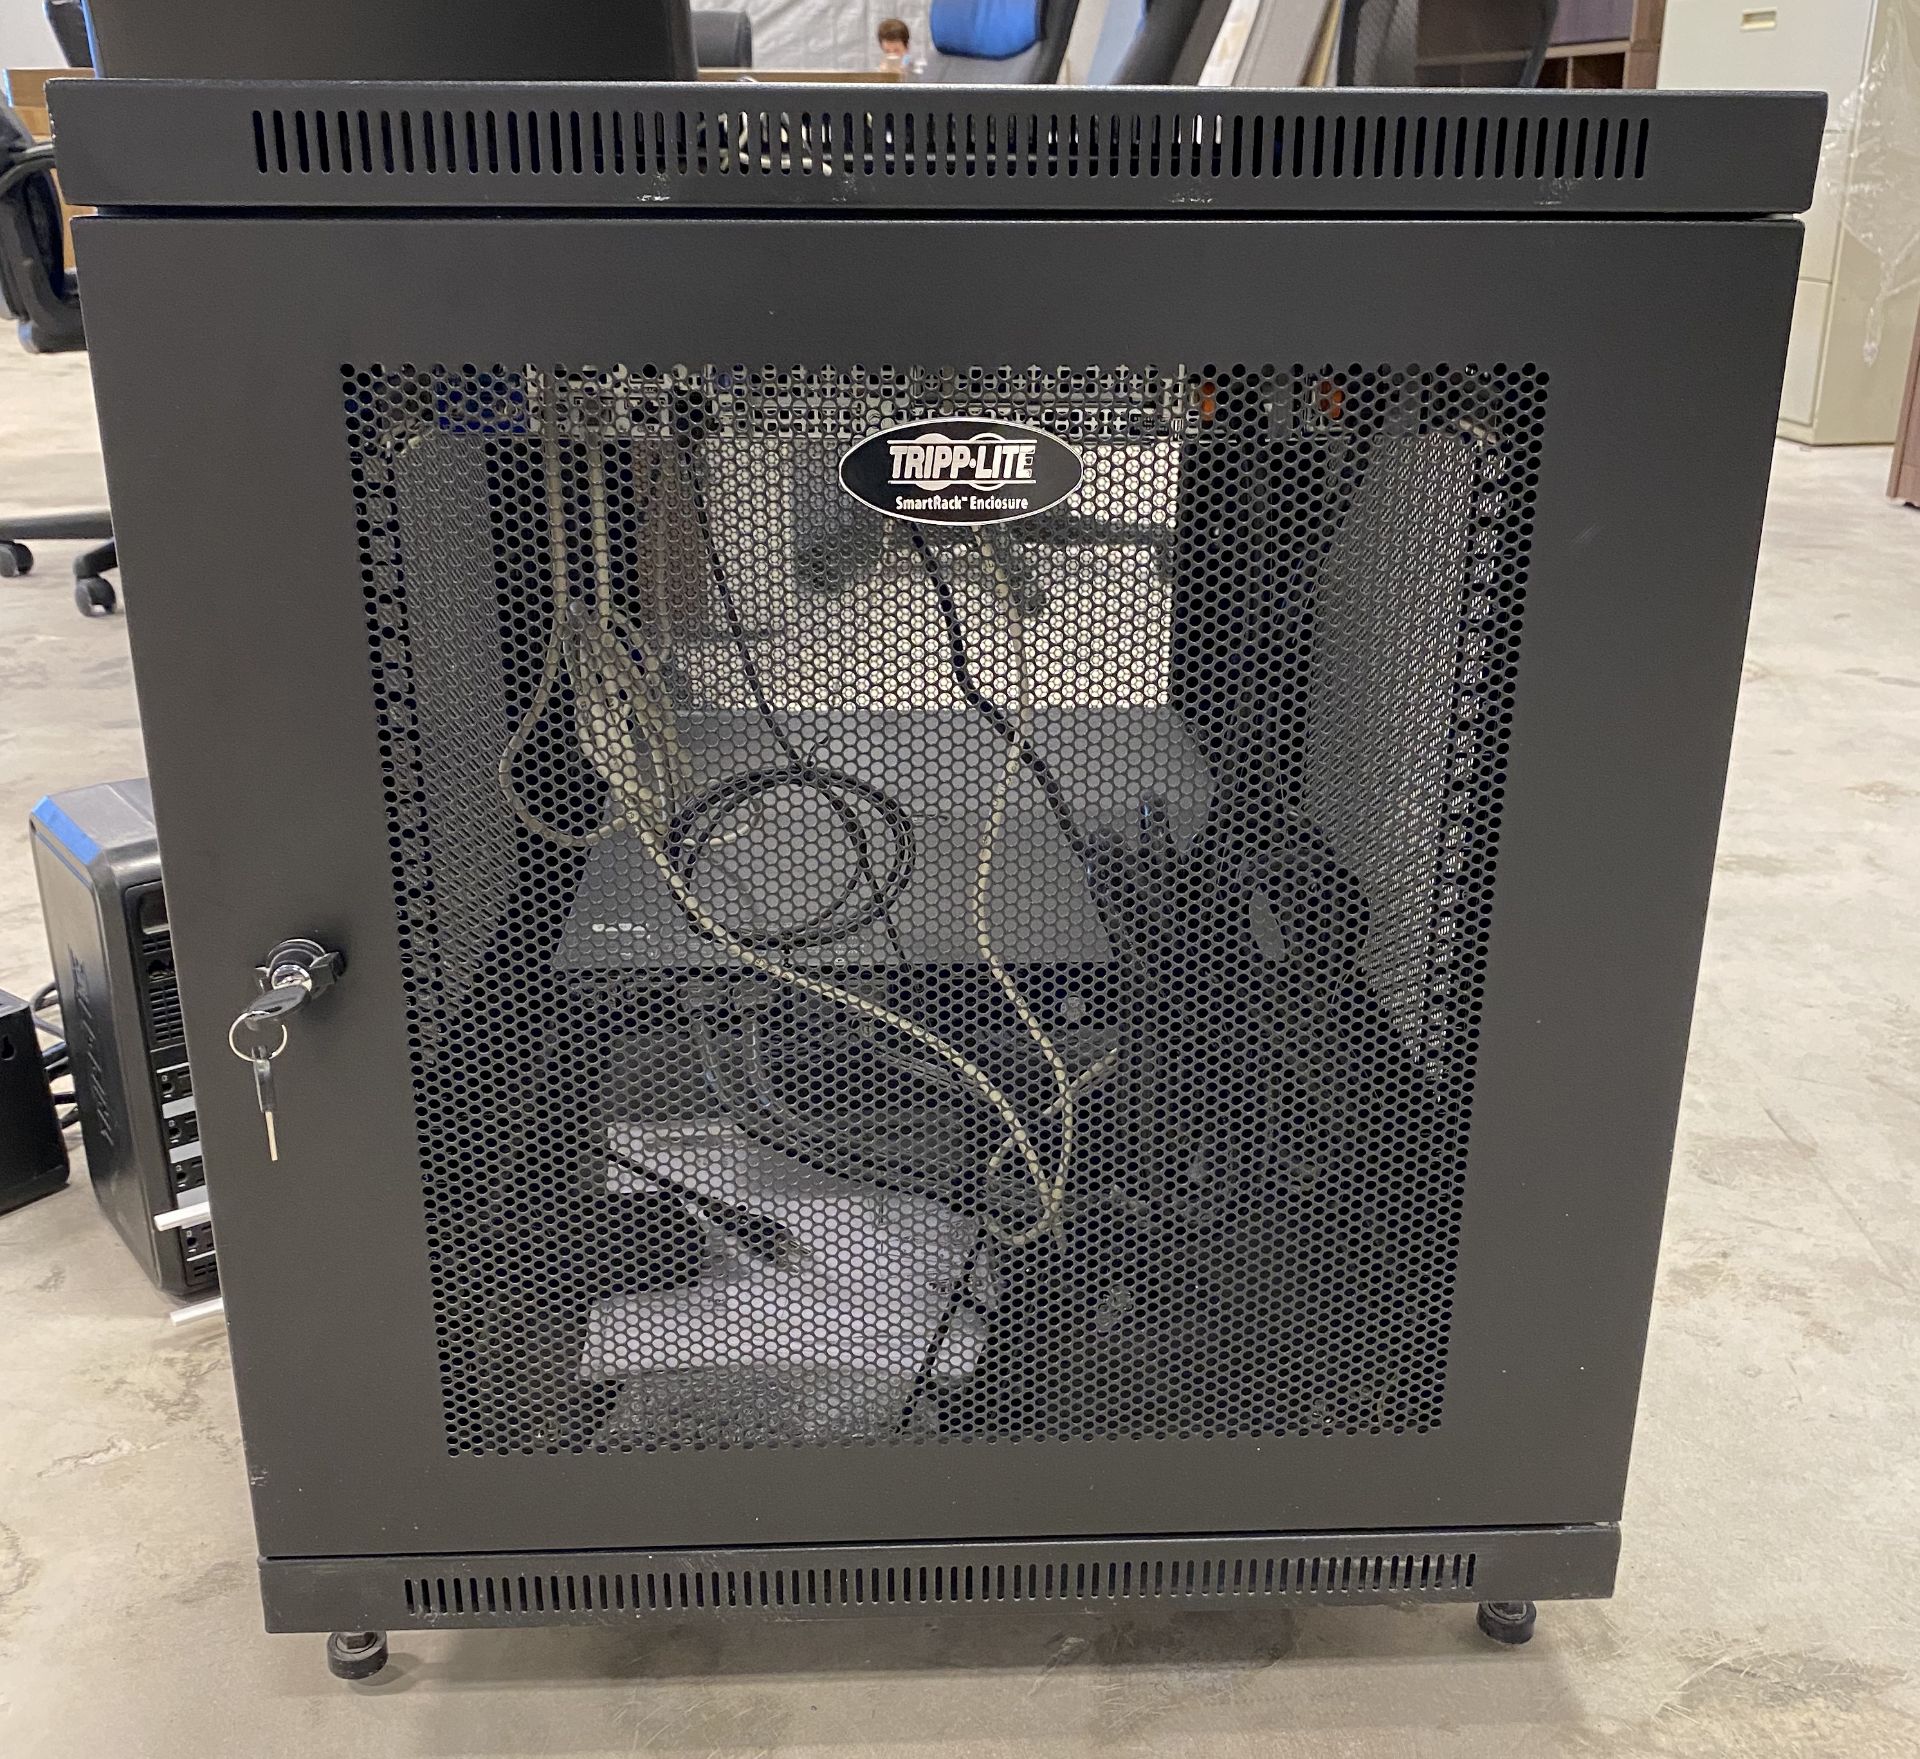 TRIPPLITE SMART RACK COMPUTER RACK ENCLOSURE WITH CyberPower Smart App Intelligent LCD OR1500LCDRM1U - Image 2 of 6